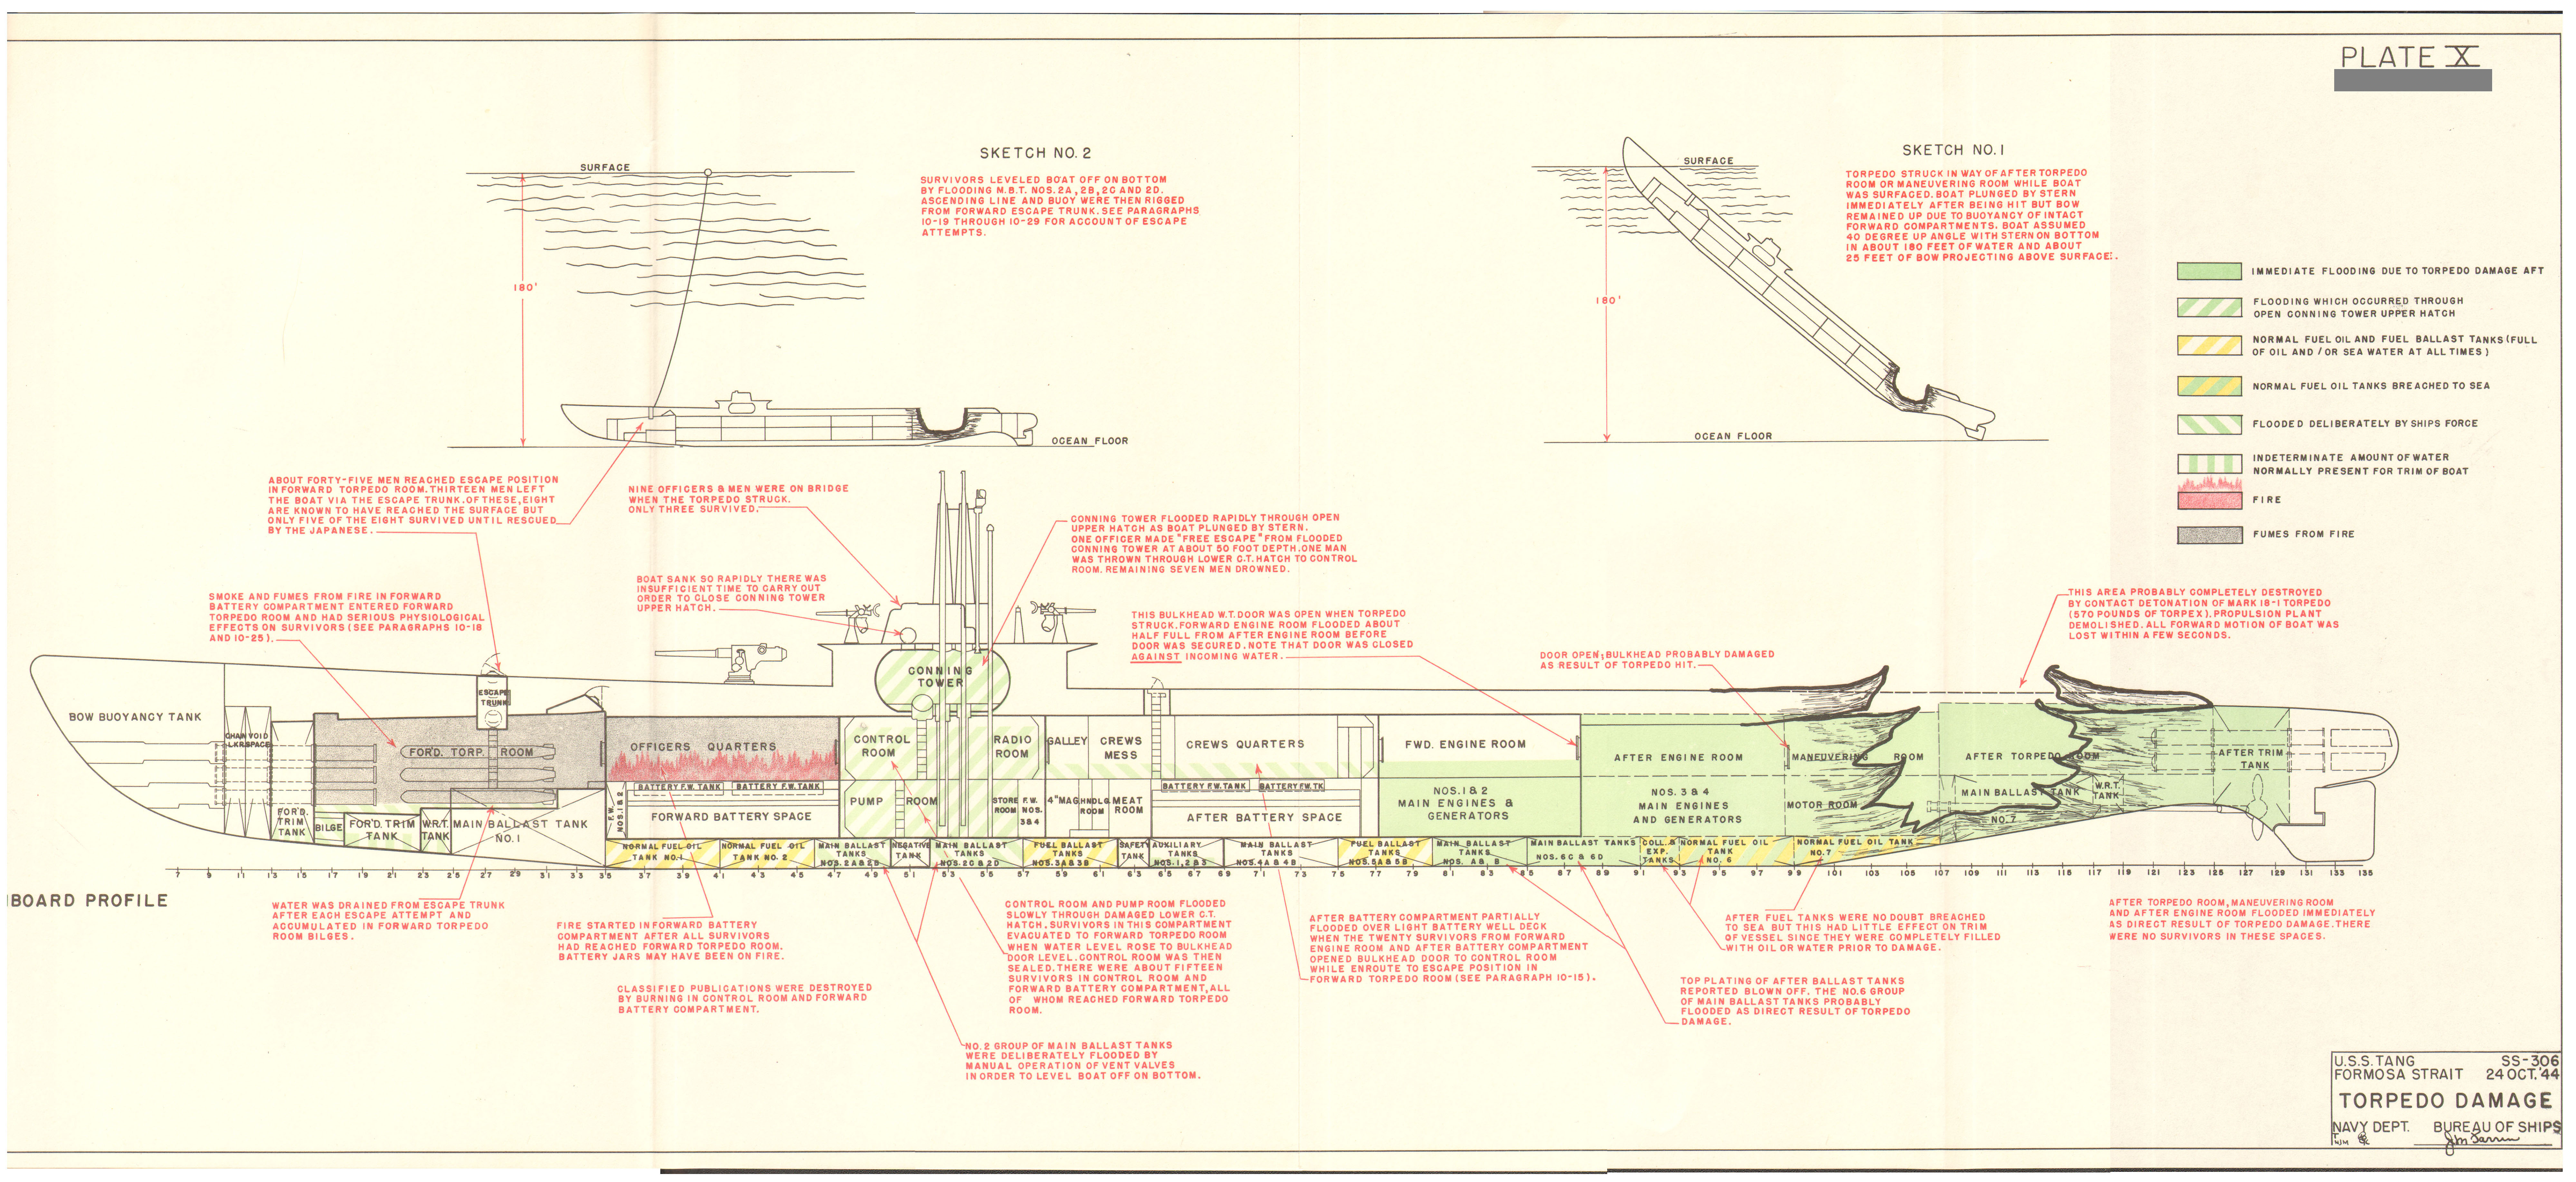 Diagram from the United States Navy’s Bureau of Ships illustrating the damage to submarine USS Tang that was sunk 25 Oct 1944 by her own Mark 18 electric torpedo that made a circular run.